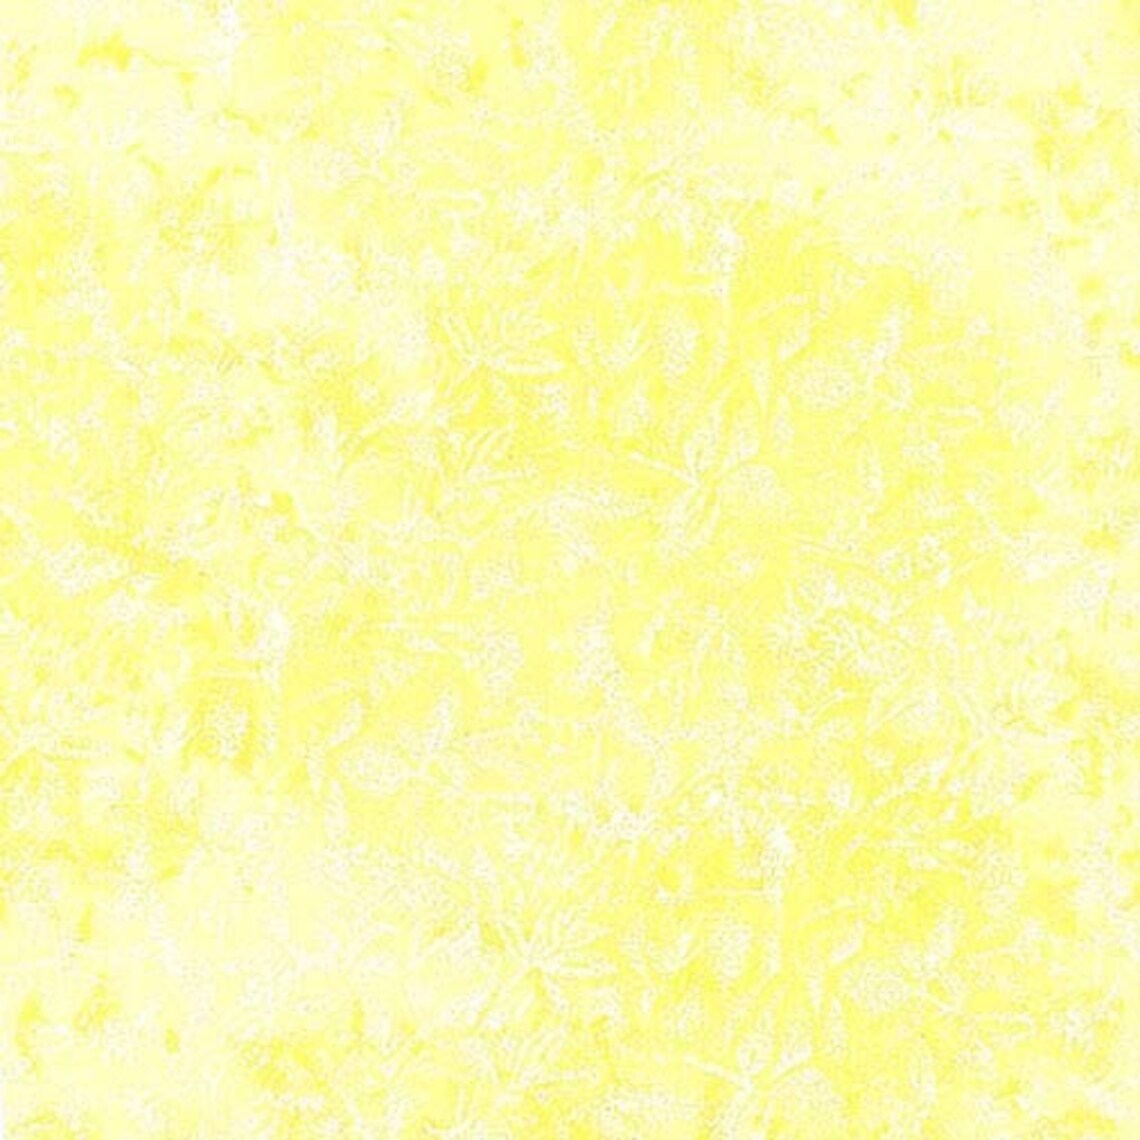 YELLOW "FIREFLY" FAIRY FROST PEARLIZED METALLIC cotton fabric by the half yard MICHAEL MILLER!